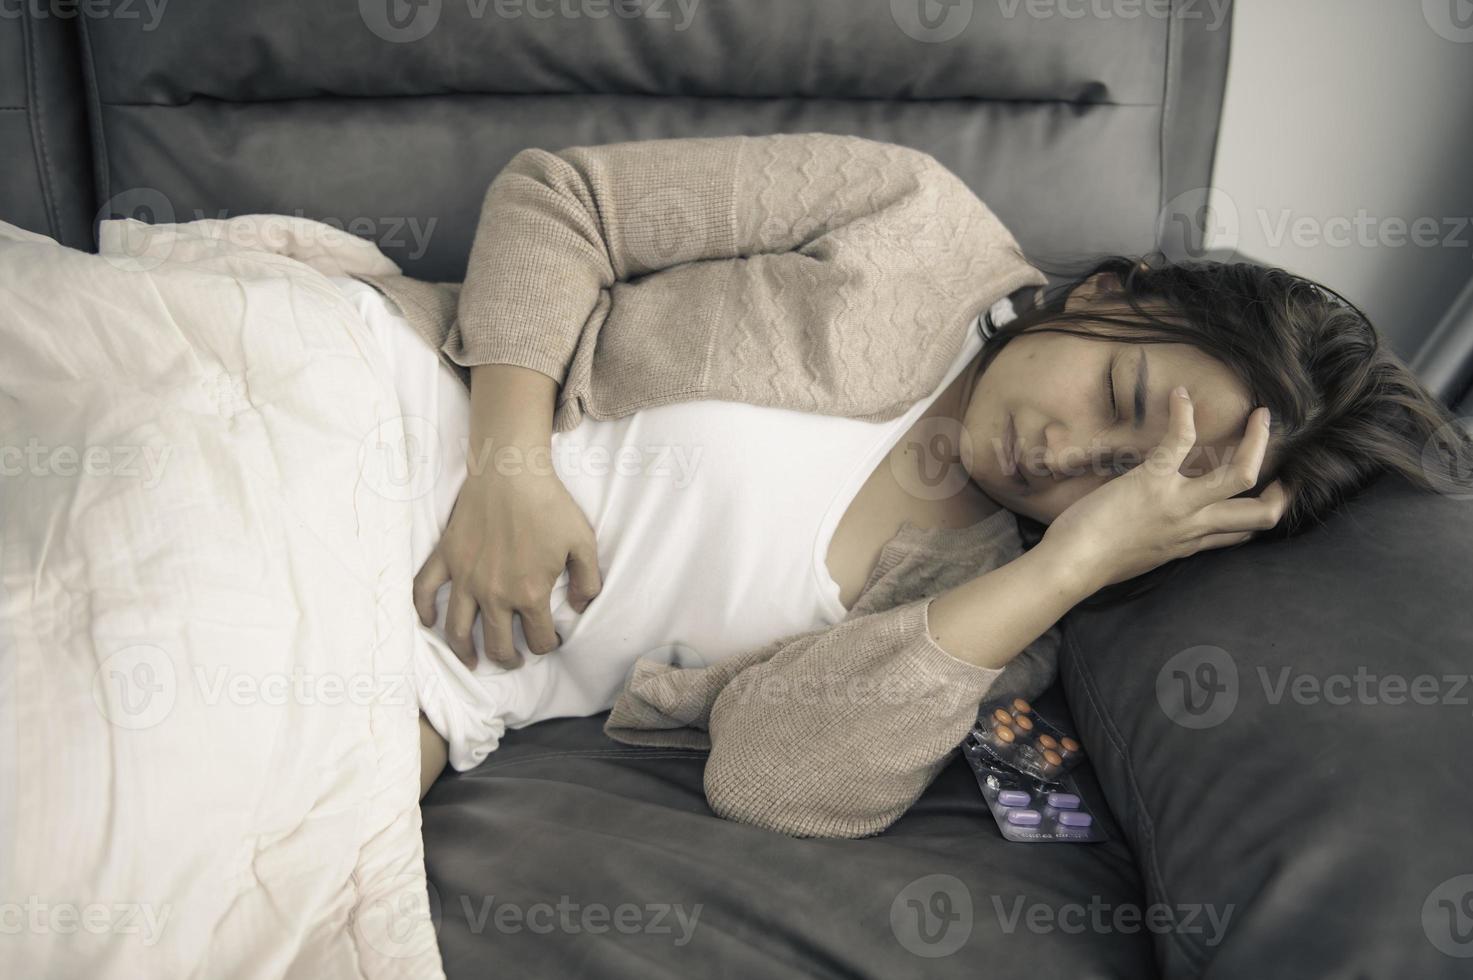 Asian sick woman sit on the sofa stay at home,The woman felt bad, wanted to lie down and rest,high fever photo